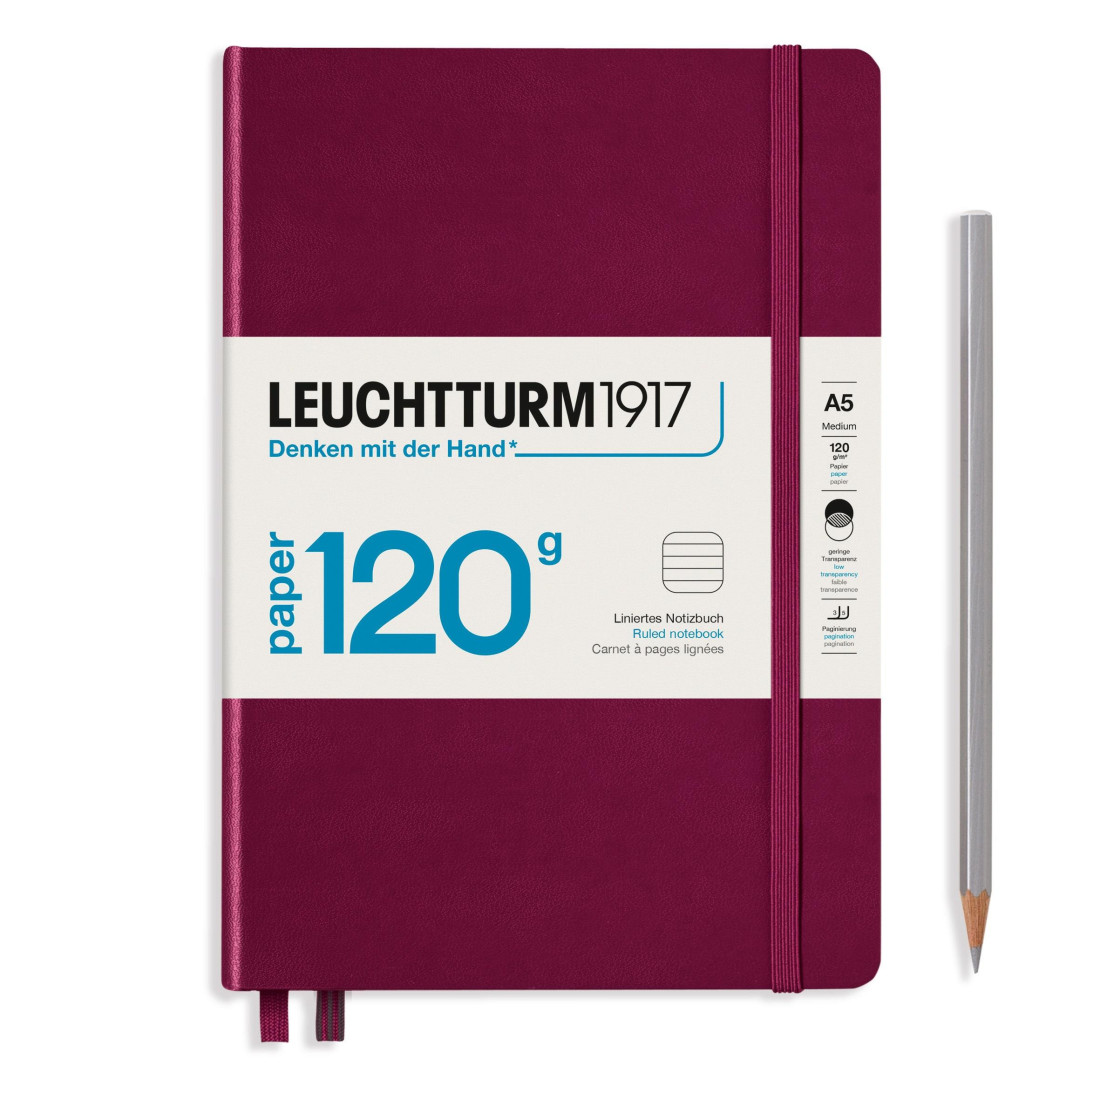 Leuchtturm 1917 Notebook A5 Edition 120g Port Red Ruled Hard Cover